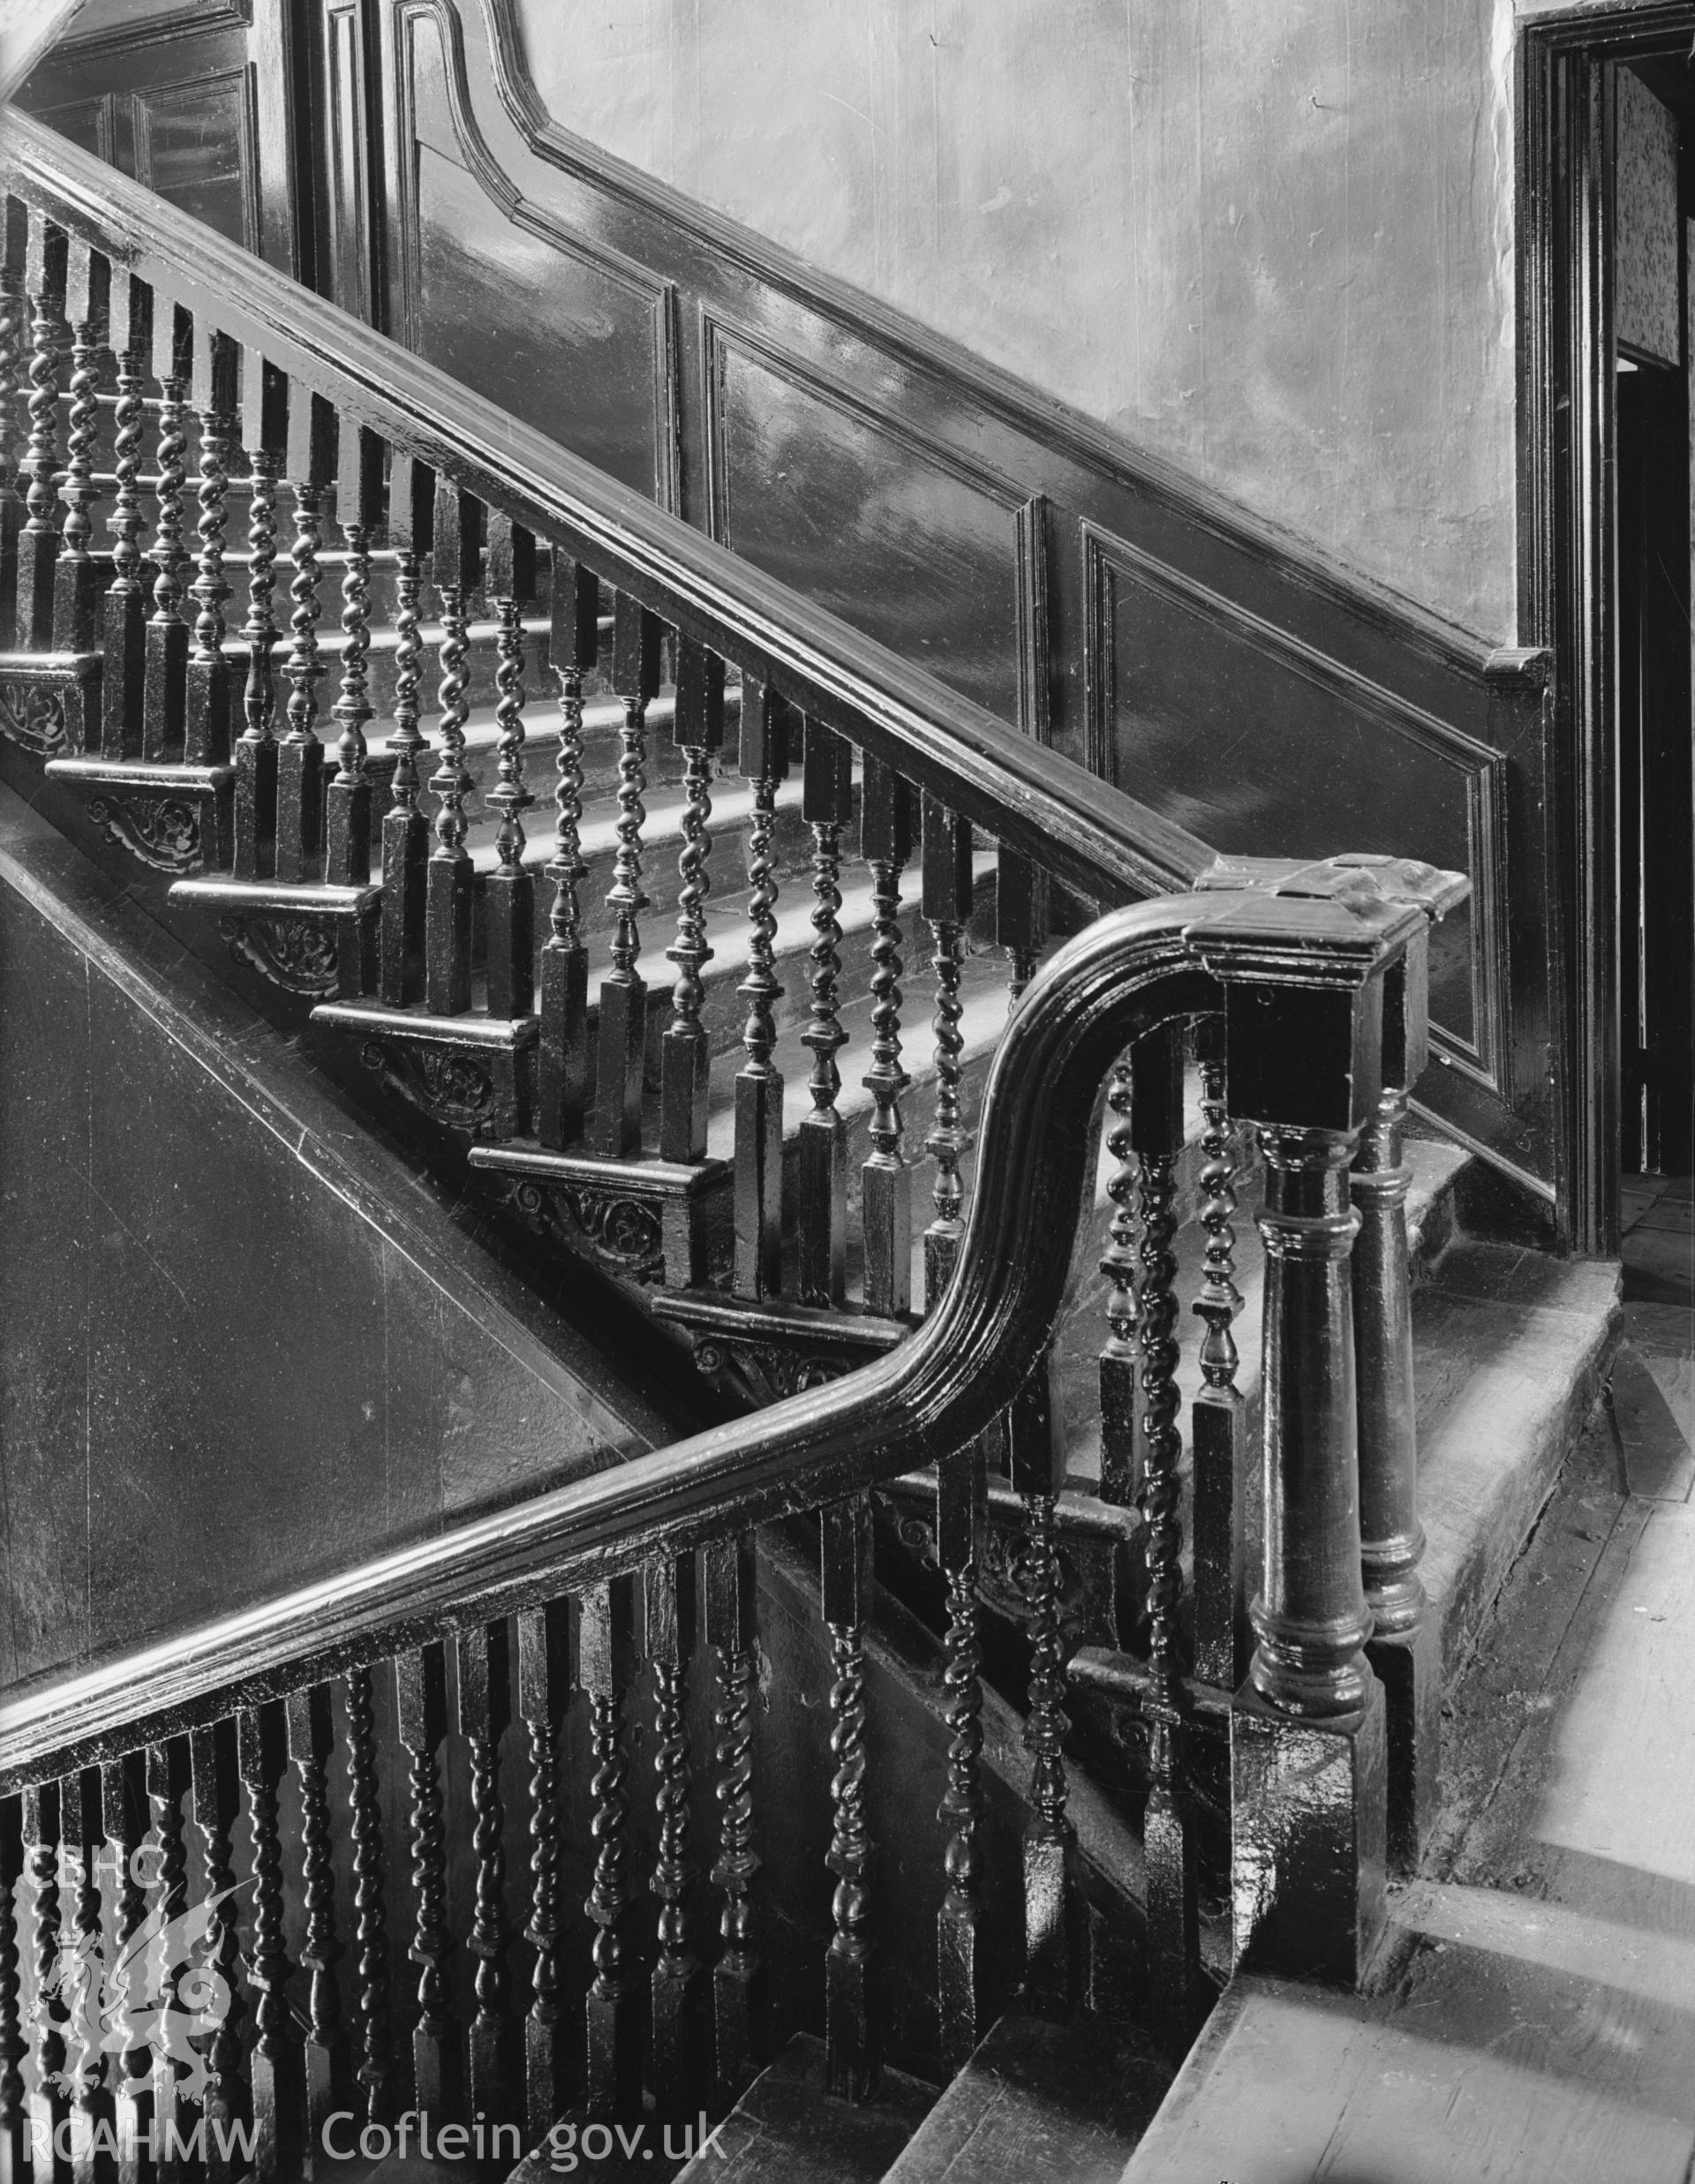 Interior view showing staircase from the first floor of Rhyd y Gors House.